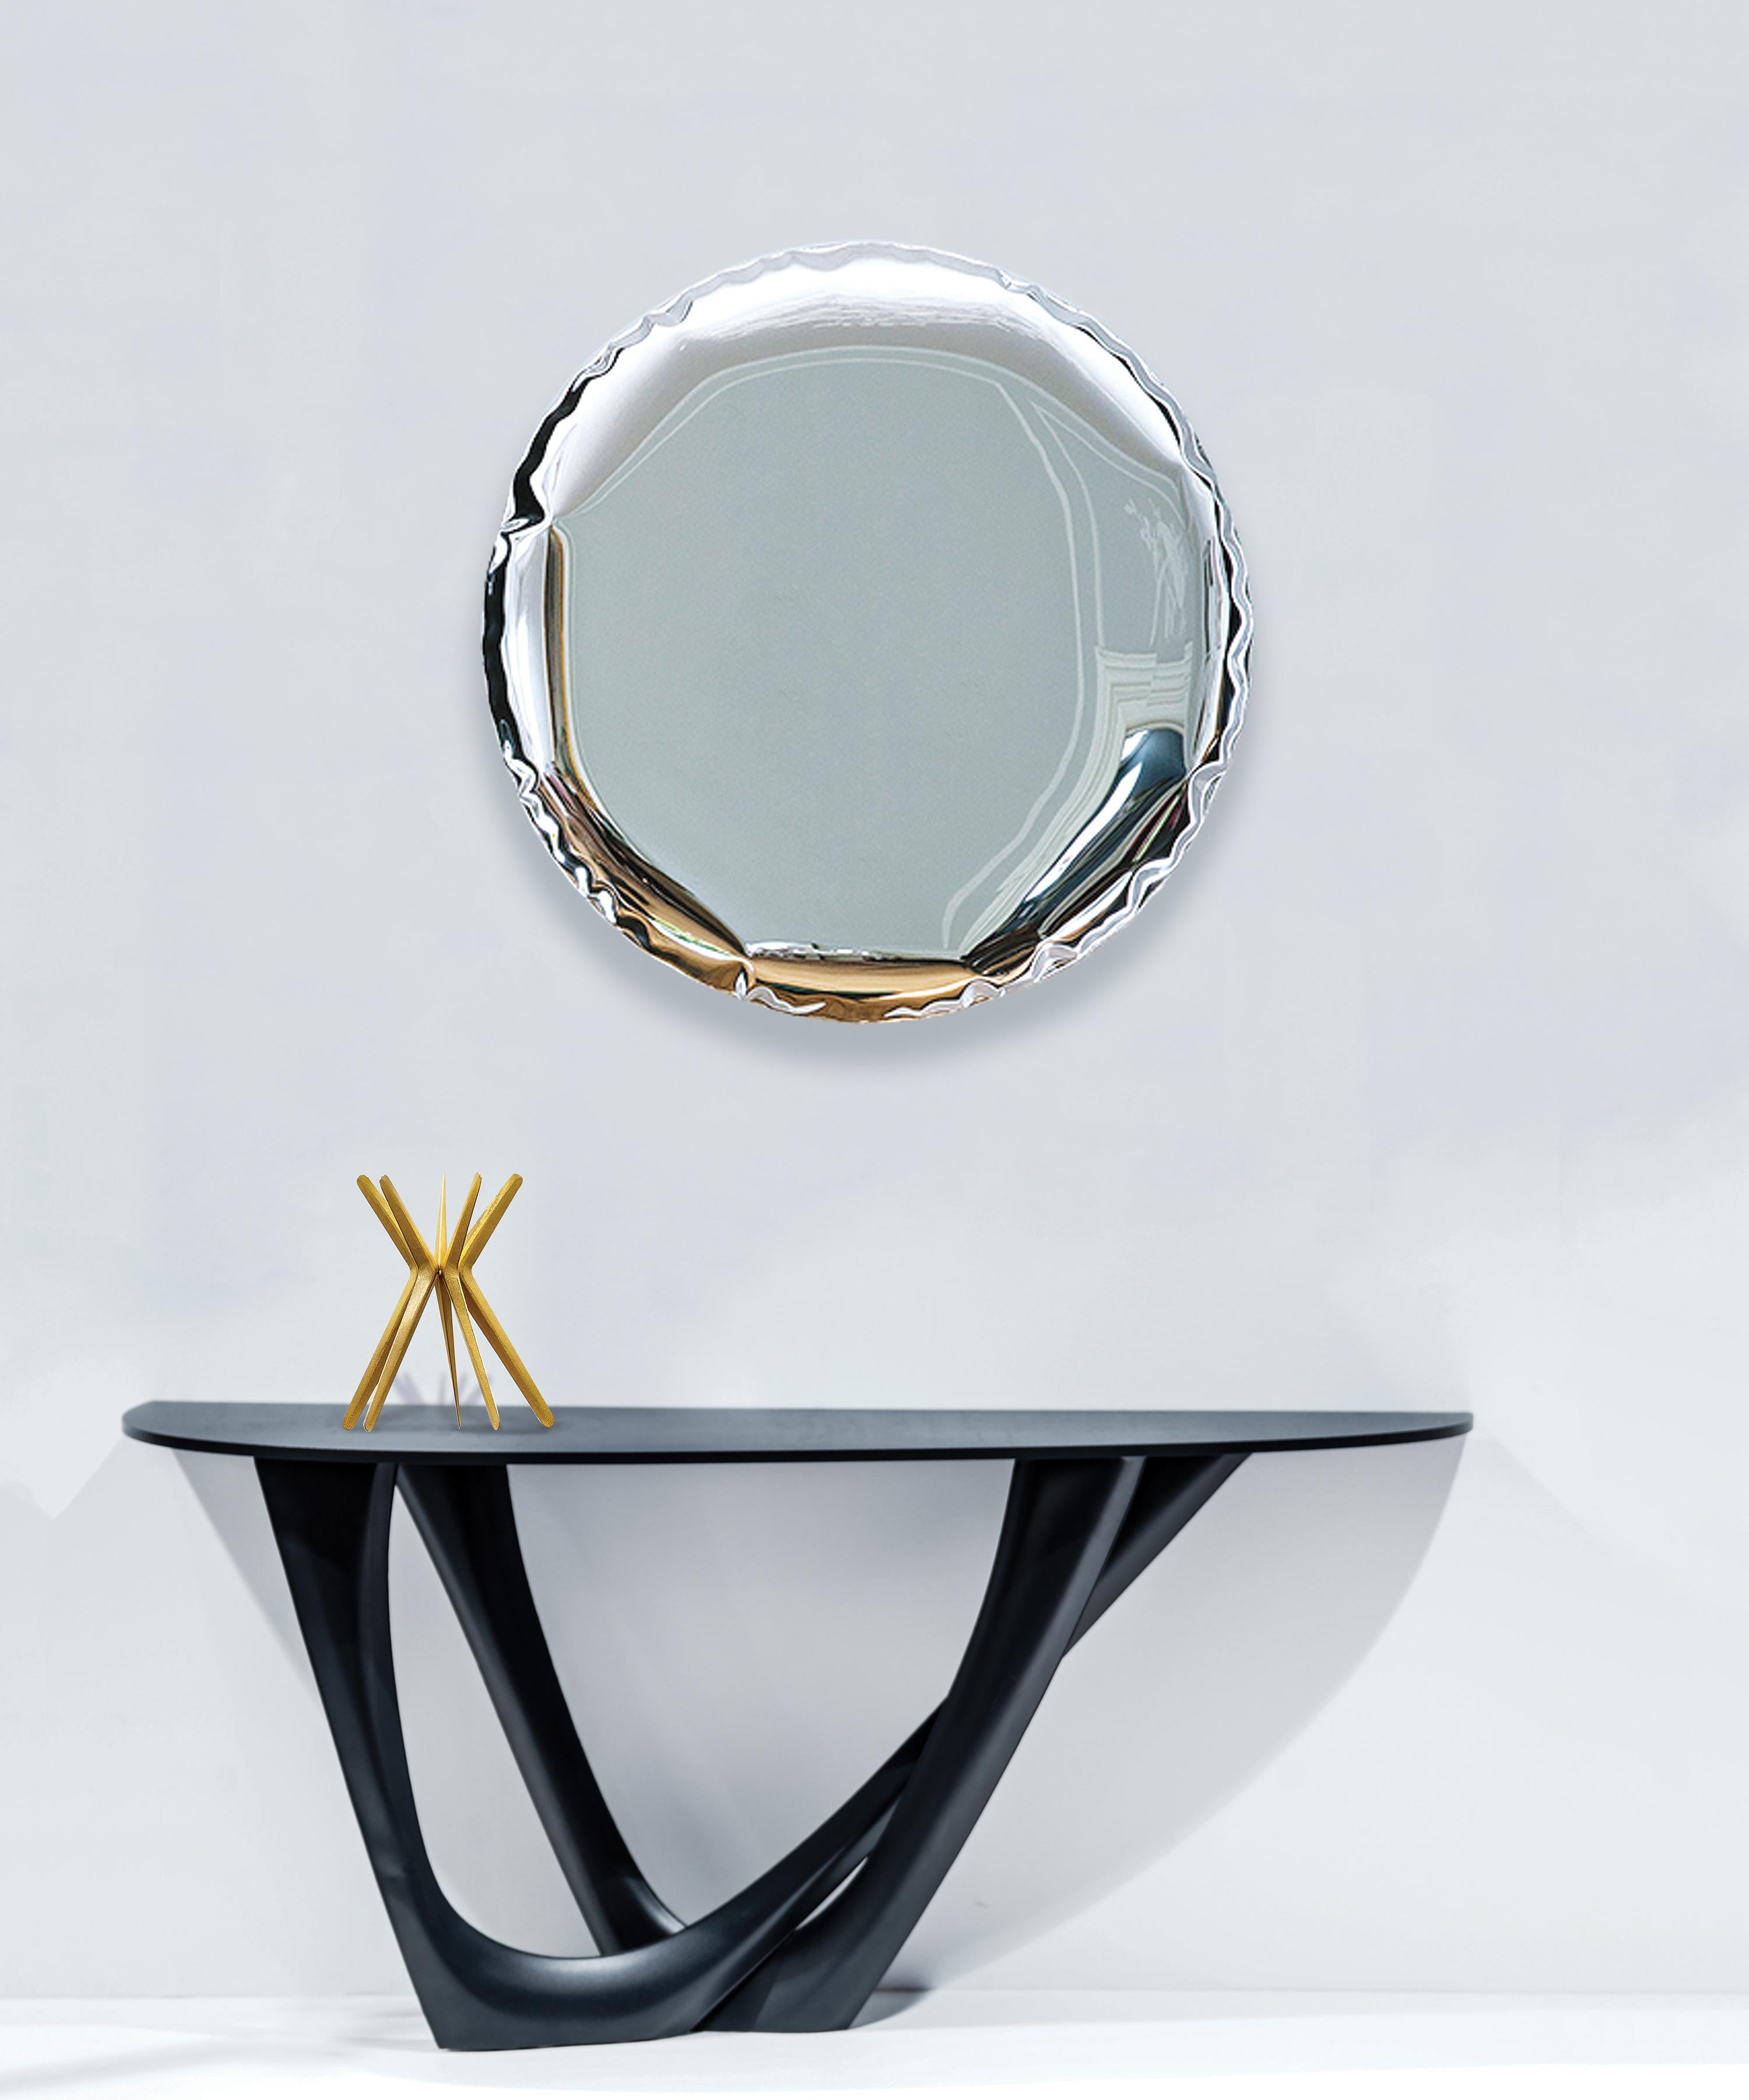 Helix Nebula Rhodonite Topaz Oko 120 Sculptural Wall Mirror by Zieta
Dimensions: ø 120 x D 6 cm. 
Material: Stainless steel. 
Finish: Helix Nebula Rhodonite Topaz transition. 

Available in different finishes. Also available in different sizes: ø75,